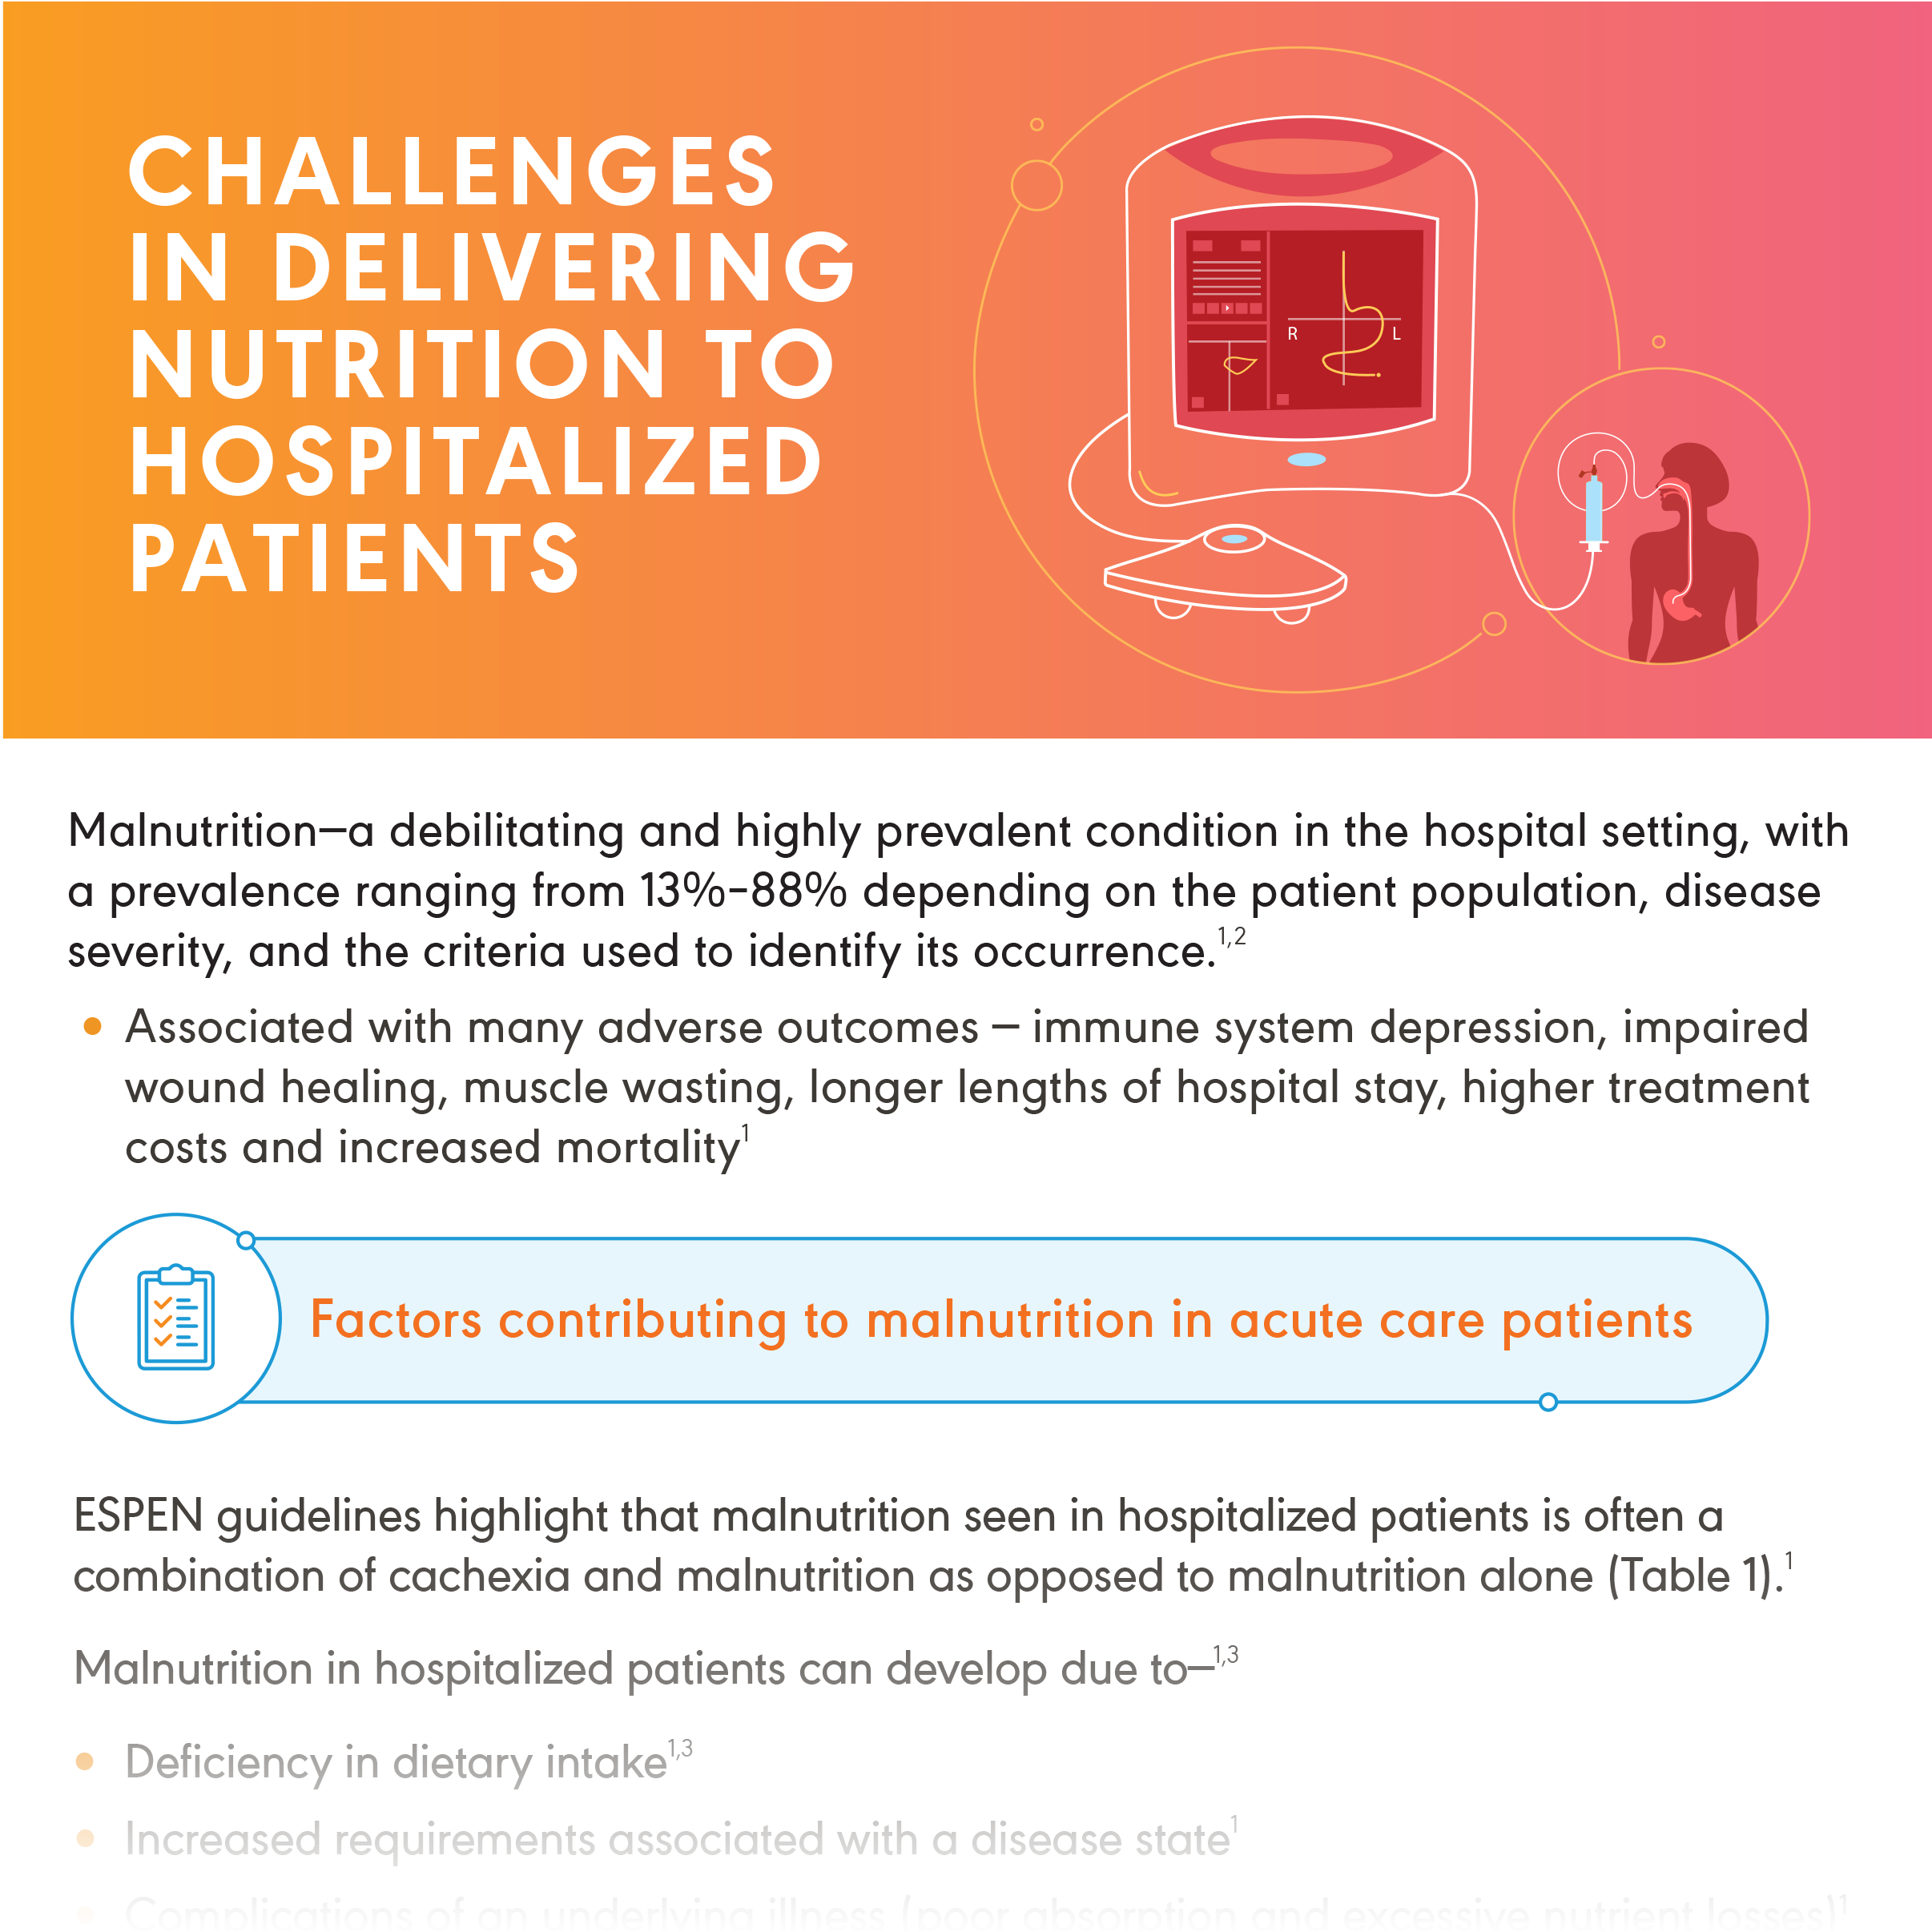 Challenges In Delivering Nutrition to Hospitalized Patients